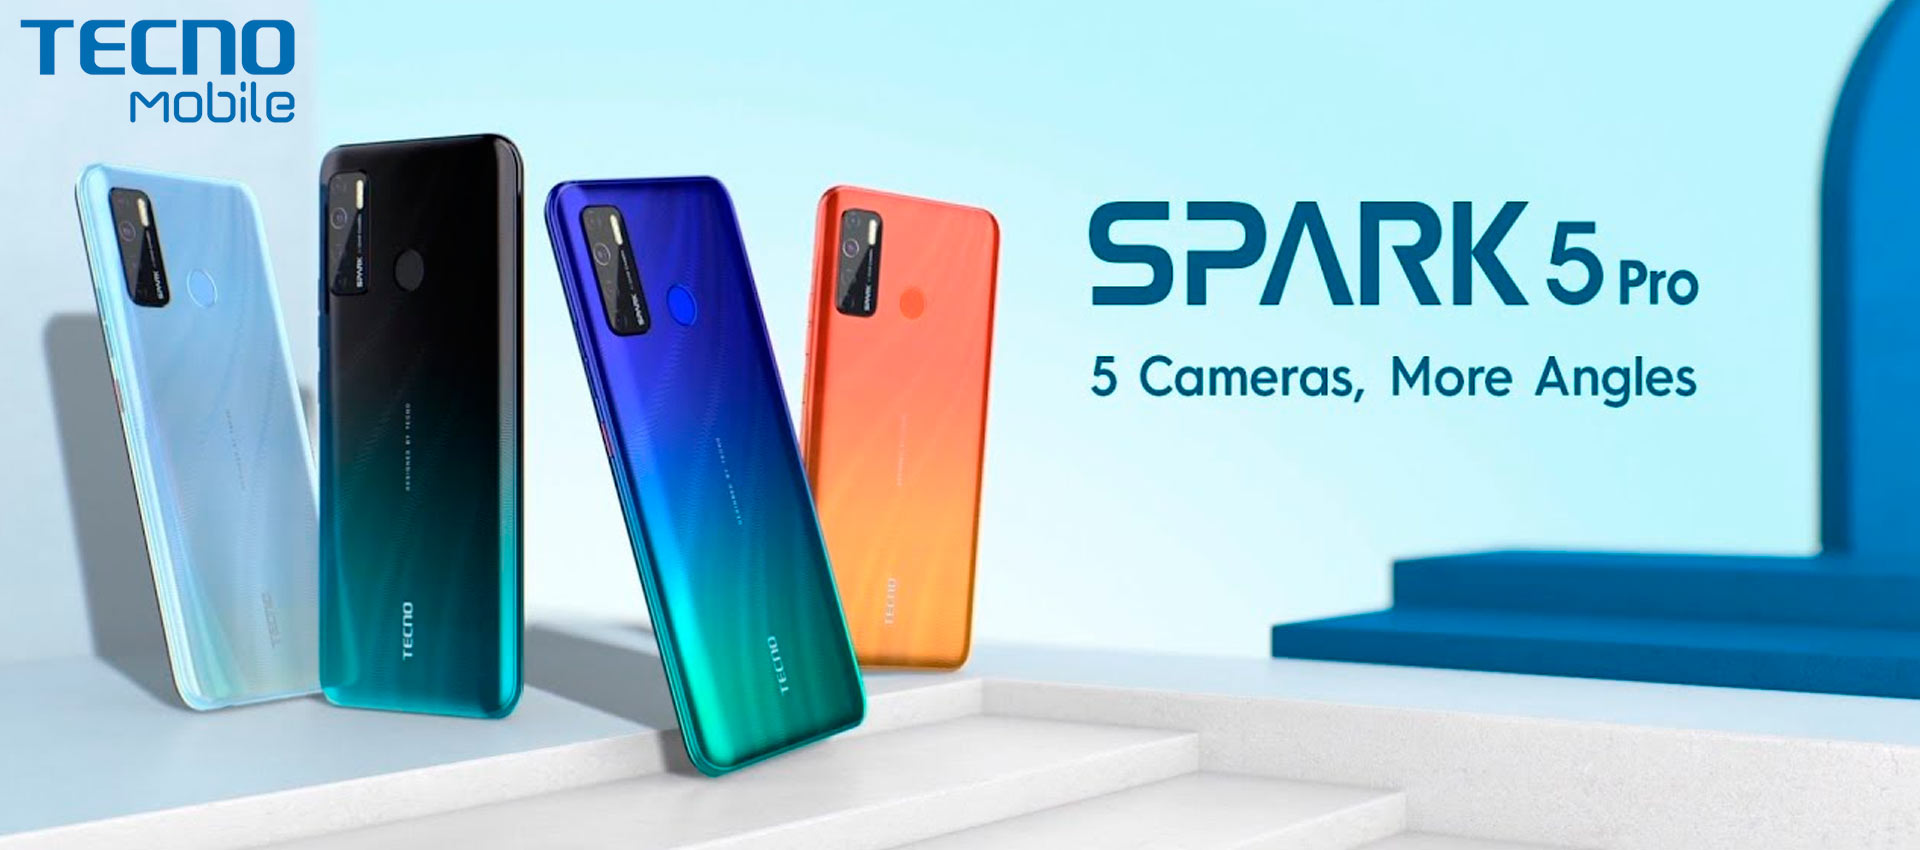 Tecno Spark 5 Pro in Pakistan - Latest and Economical